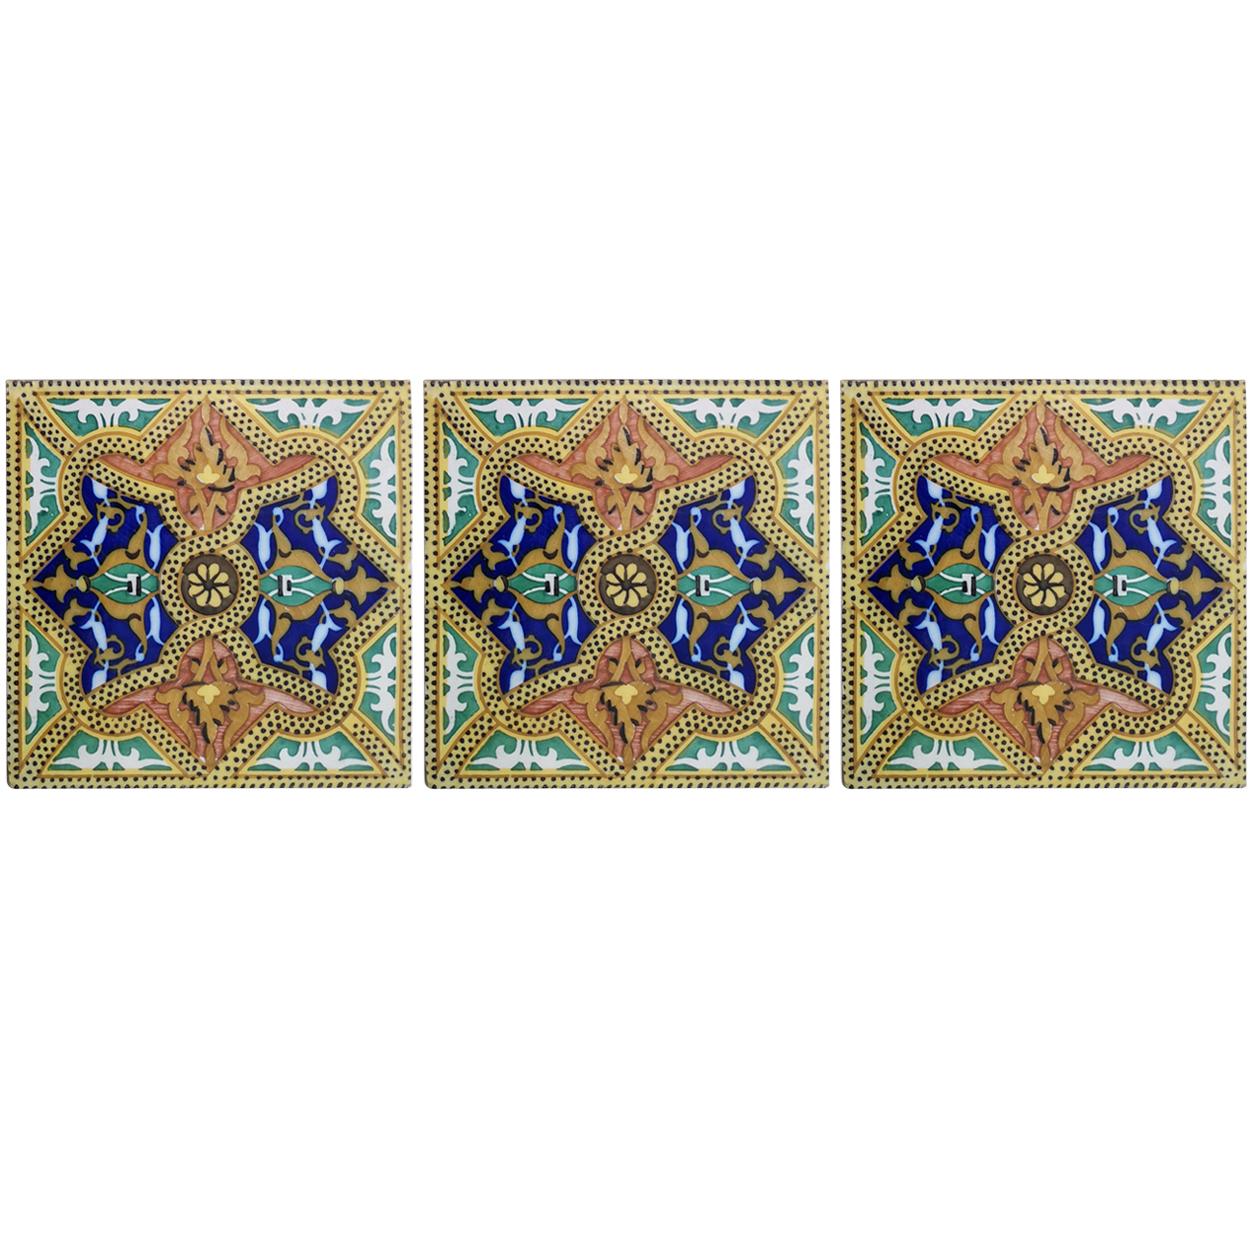 Set of 6 pcs. Exceptional antique Spanish wall tiles, white with rich colors cobalt blue and moss green (Onda, Spain Valencia). 
The dimensions per tile are 7.9 inch (20 cm) × 7.9 inch (20 cm). 

Please note that the piece is for the set!